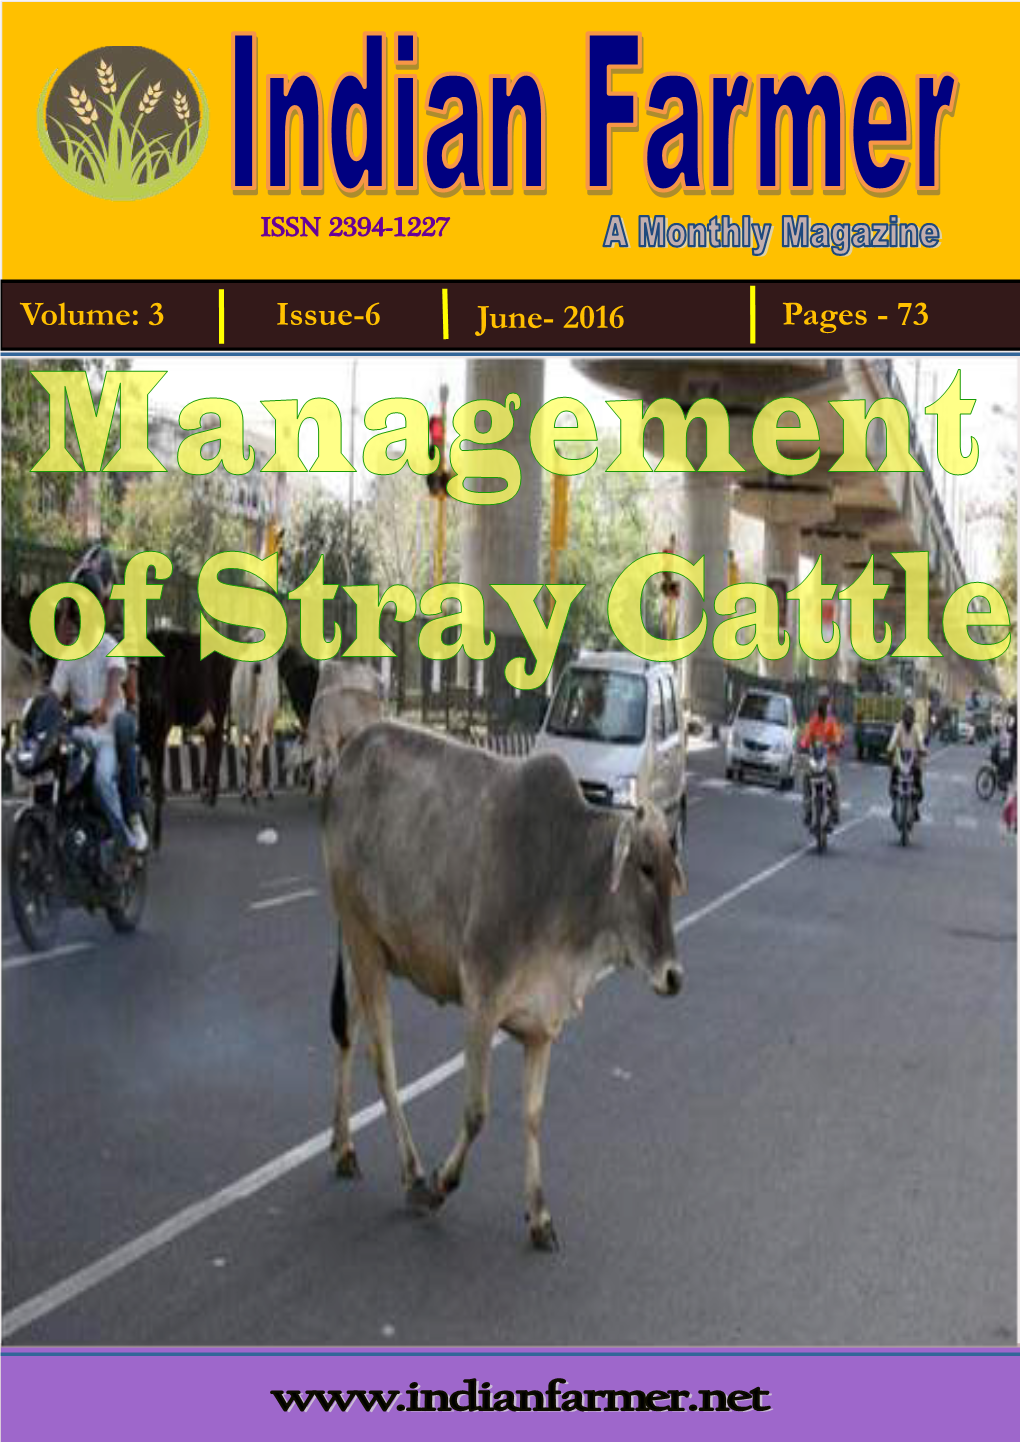 3 Issue-6 June- 2016 Pages - 73 Indian Farmer a Monthly Magazine